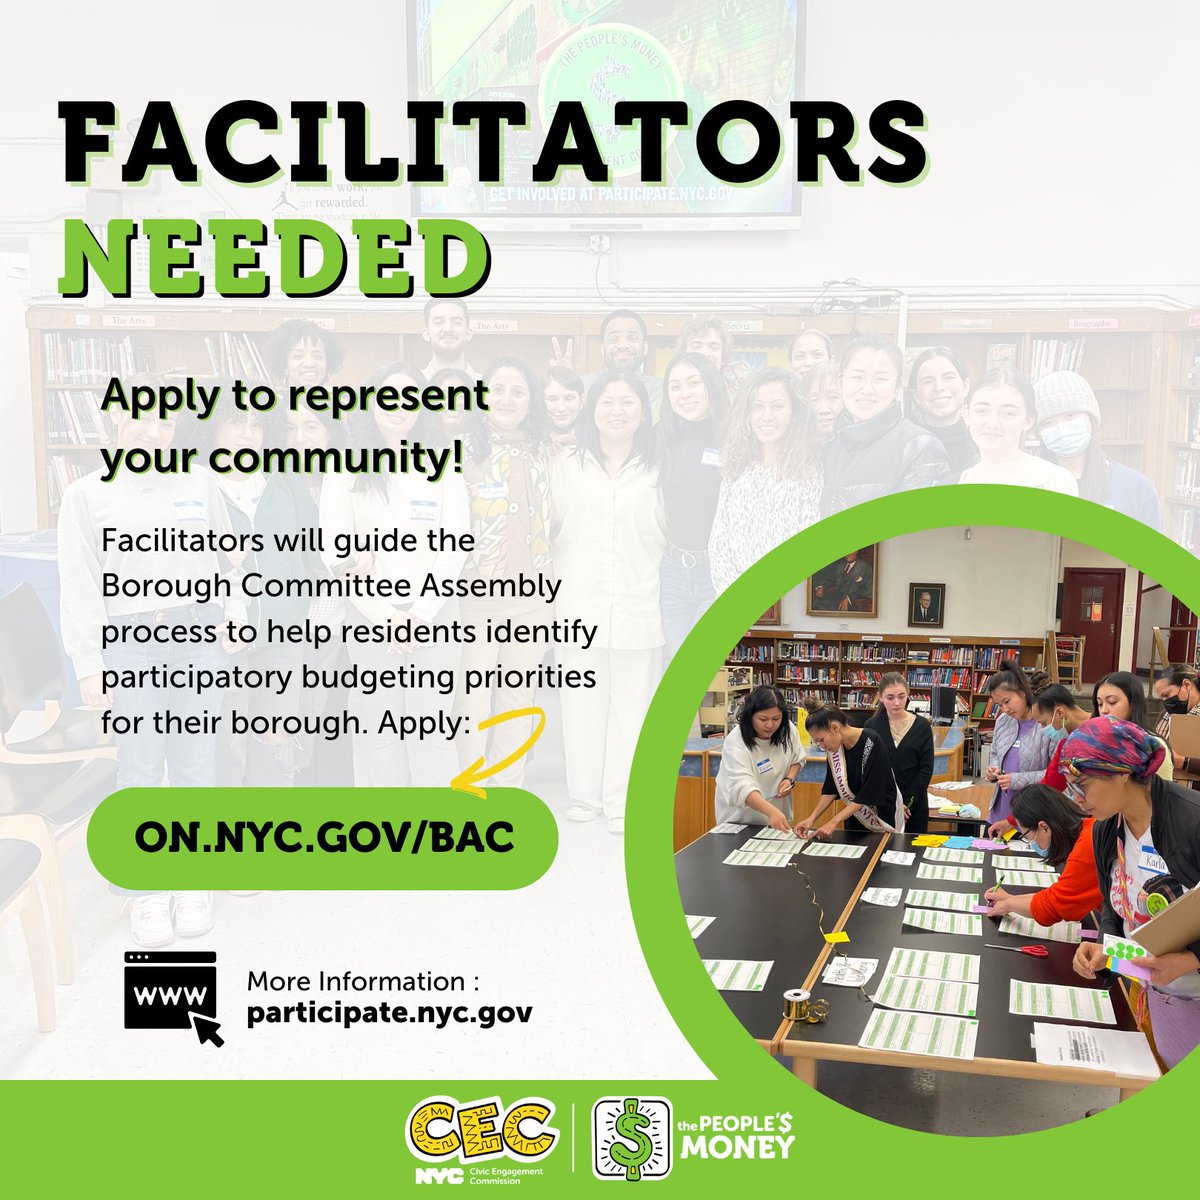 #ThePeoplesMoney team in each borough is looking for @CUNY student facilitators! In that paid role, you can expect to work with your neighbors & @NYCCEC to review & develop #ParticipatoryBudgeting project! 
Apply by 10/13: on.nyc.gov/bac. Info: participate.nyc.gov